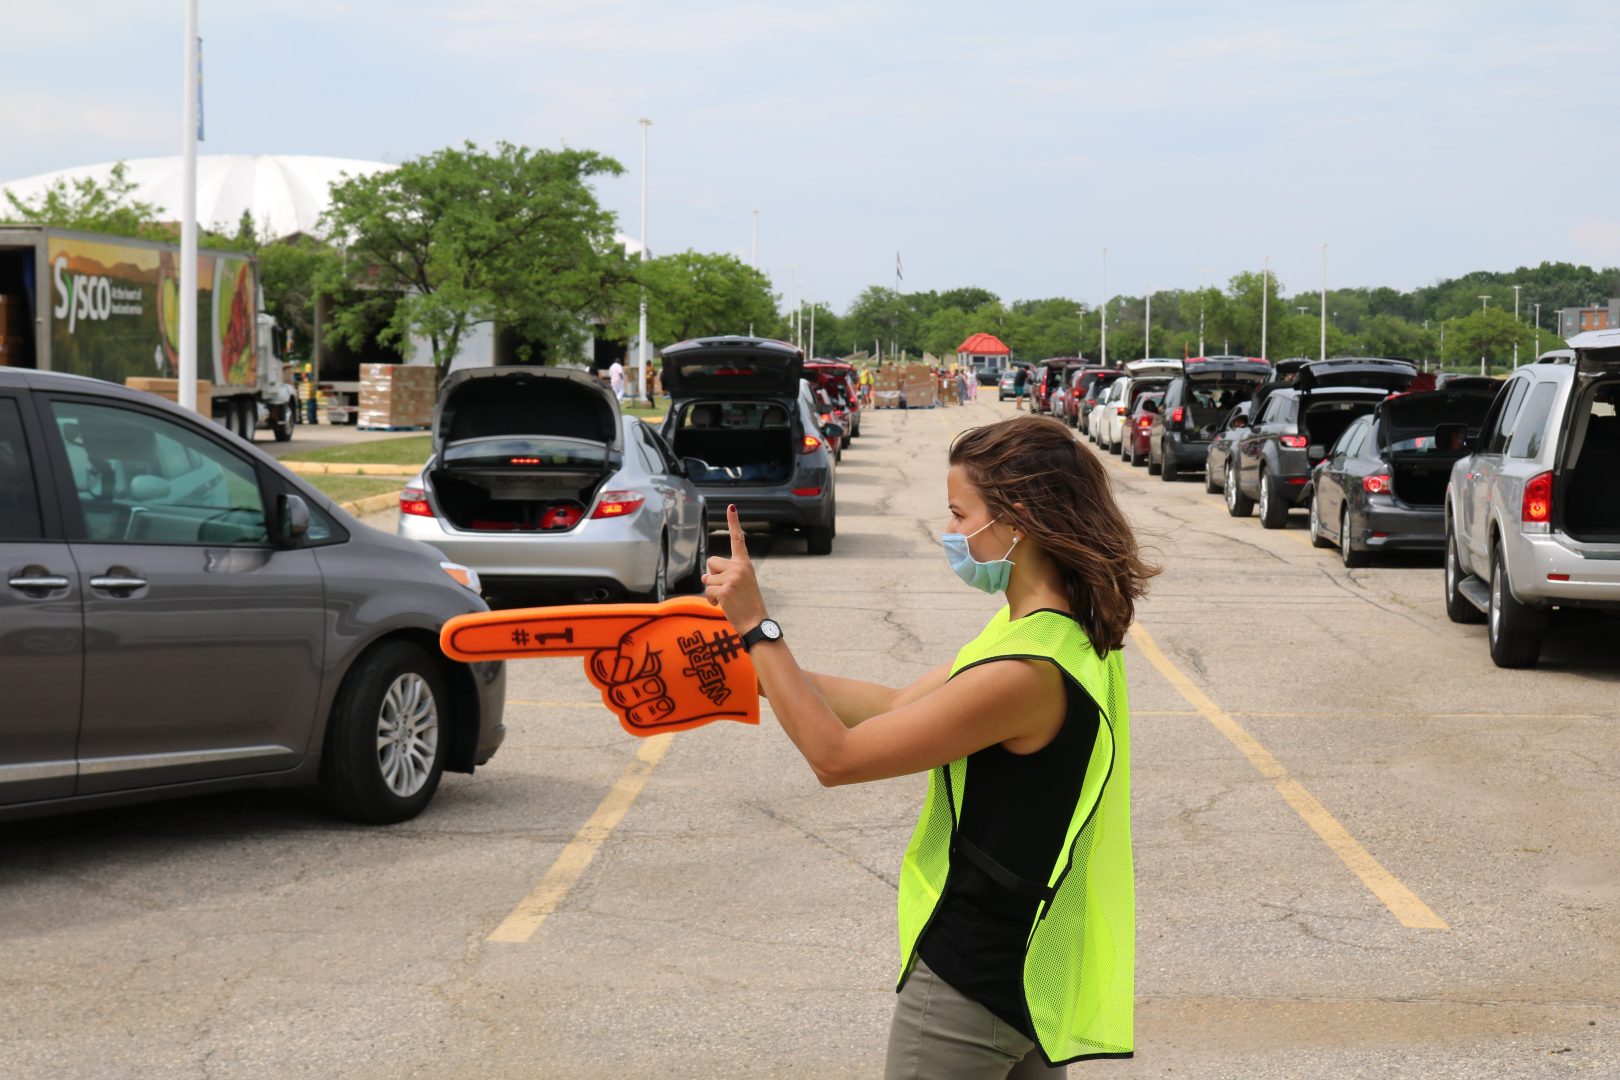 Second Harvest staff person directing traffic at a food distribution site.